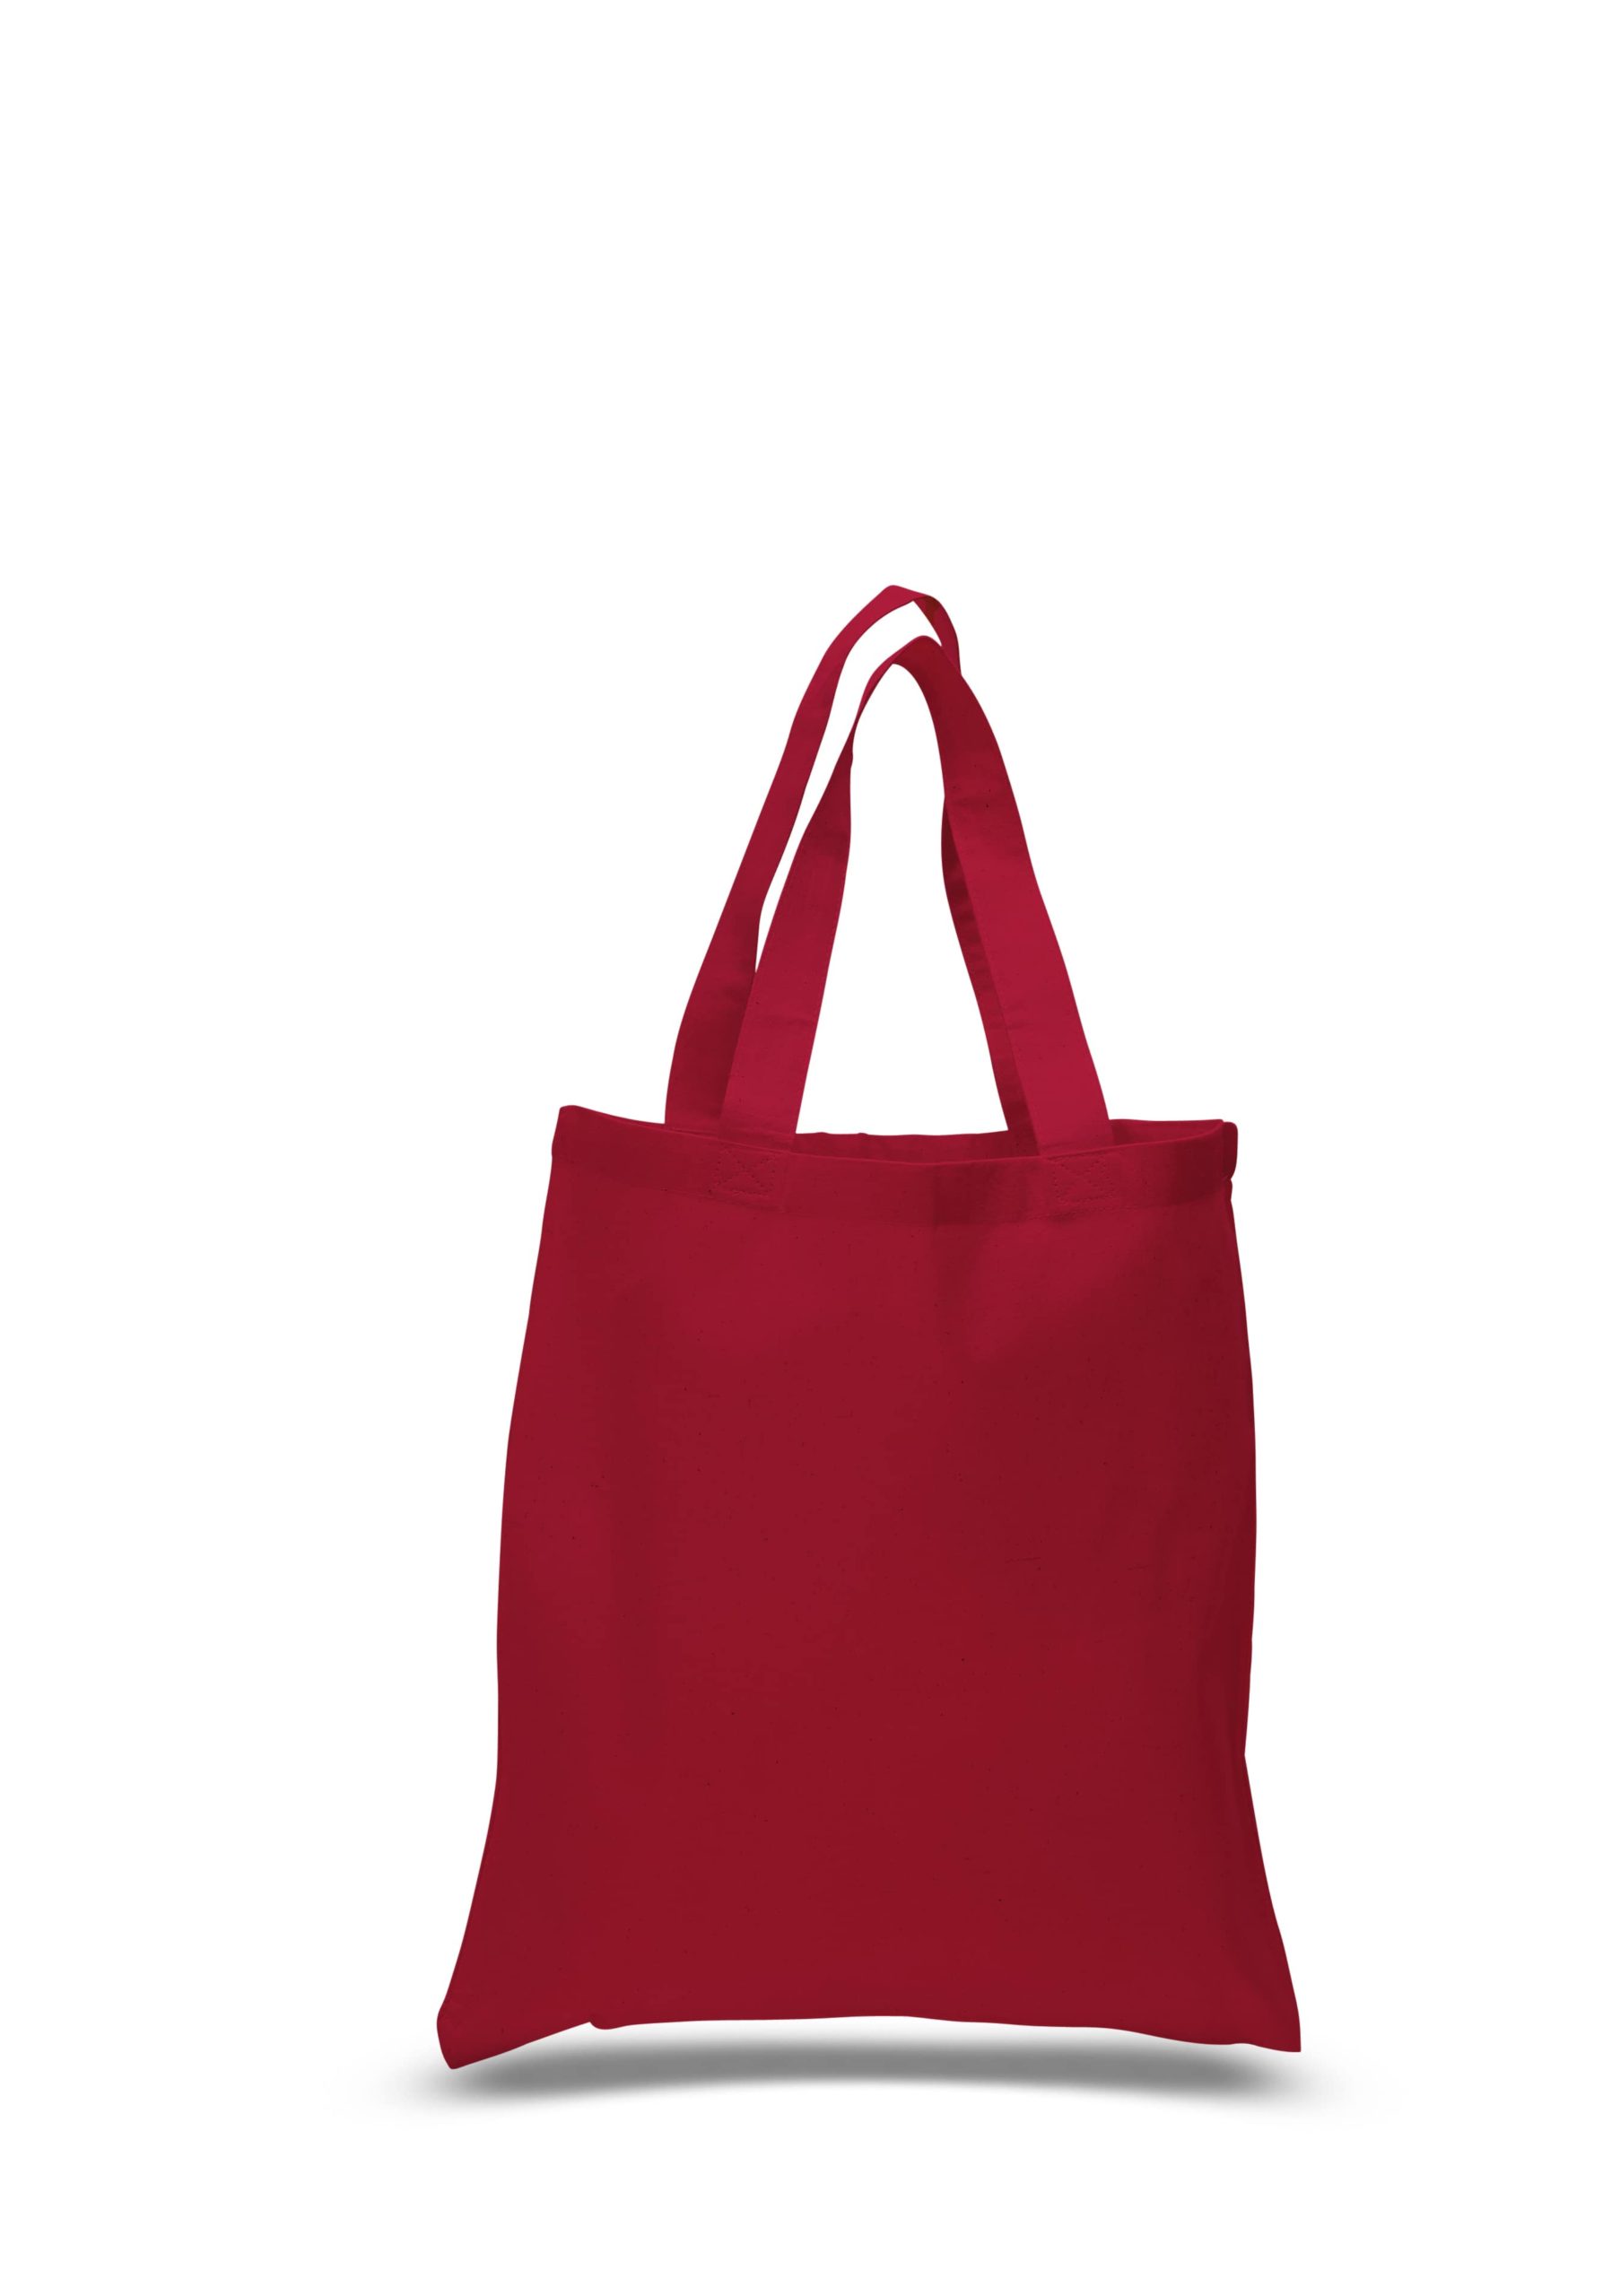 Q-Tees Economical Tote from Sportsman Cap & Bag